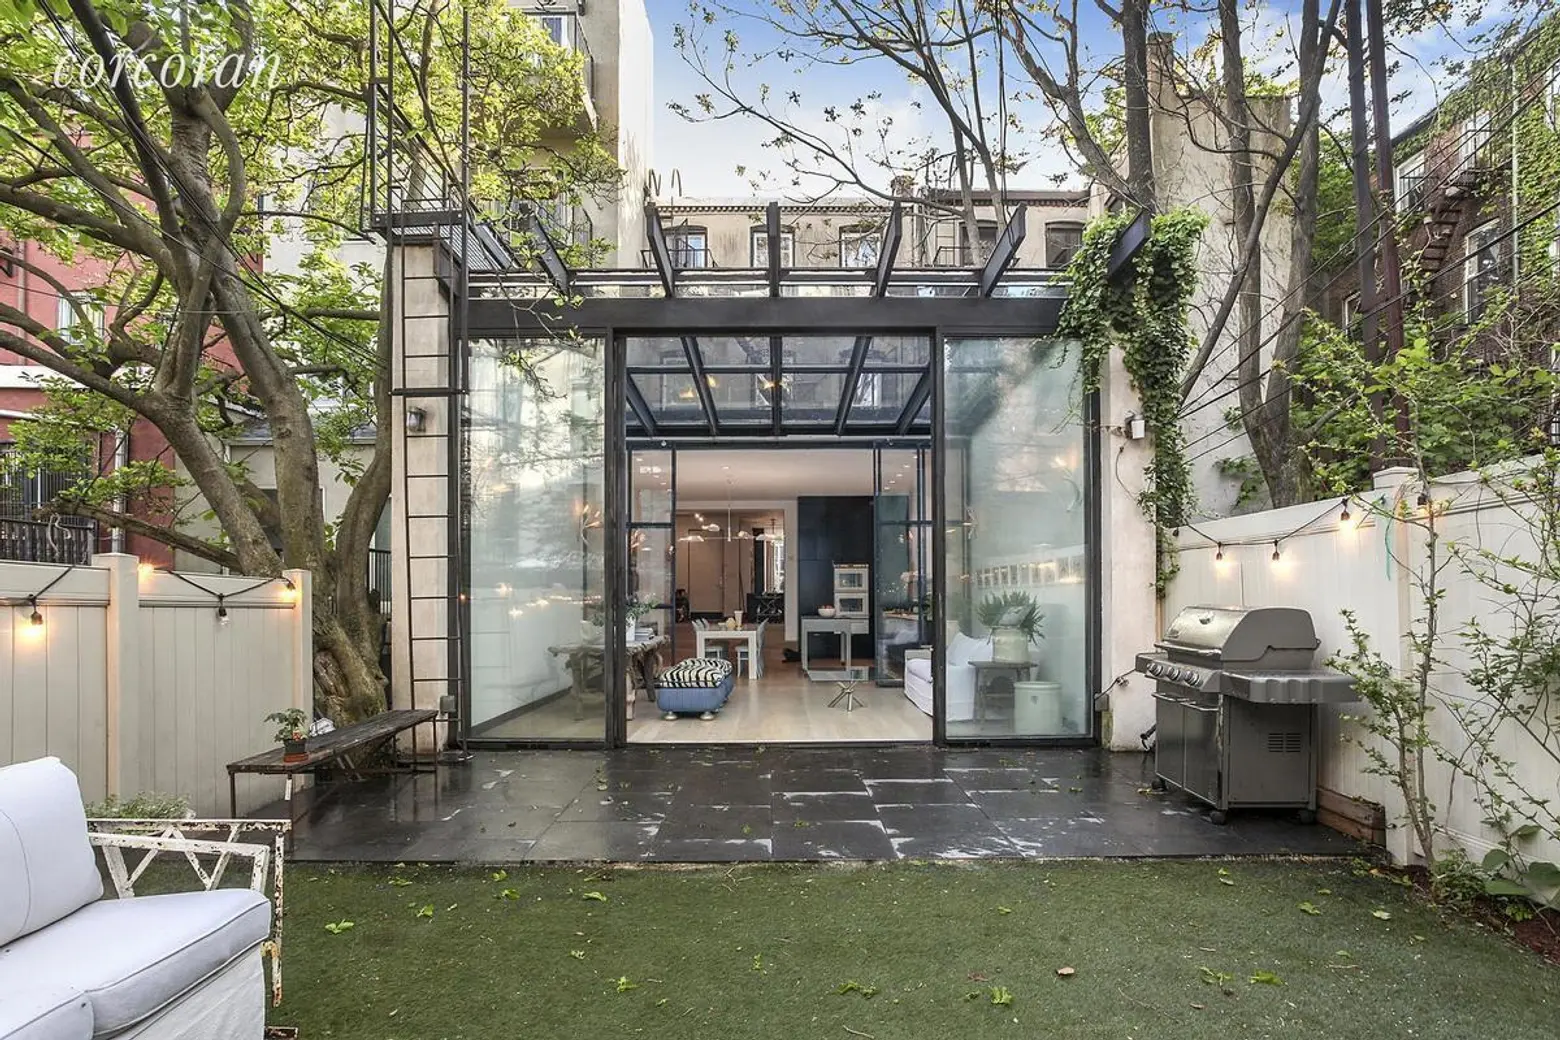 $2.75M Park Slope townhouse has a sky-lit glass extension and a wealth of options